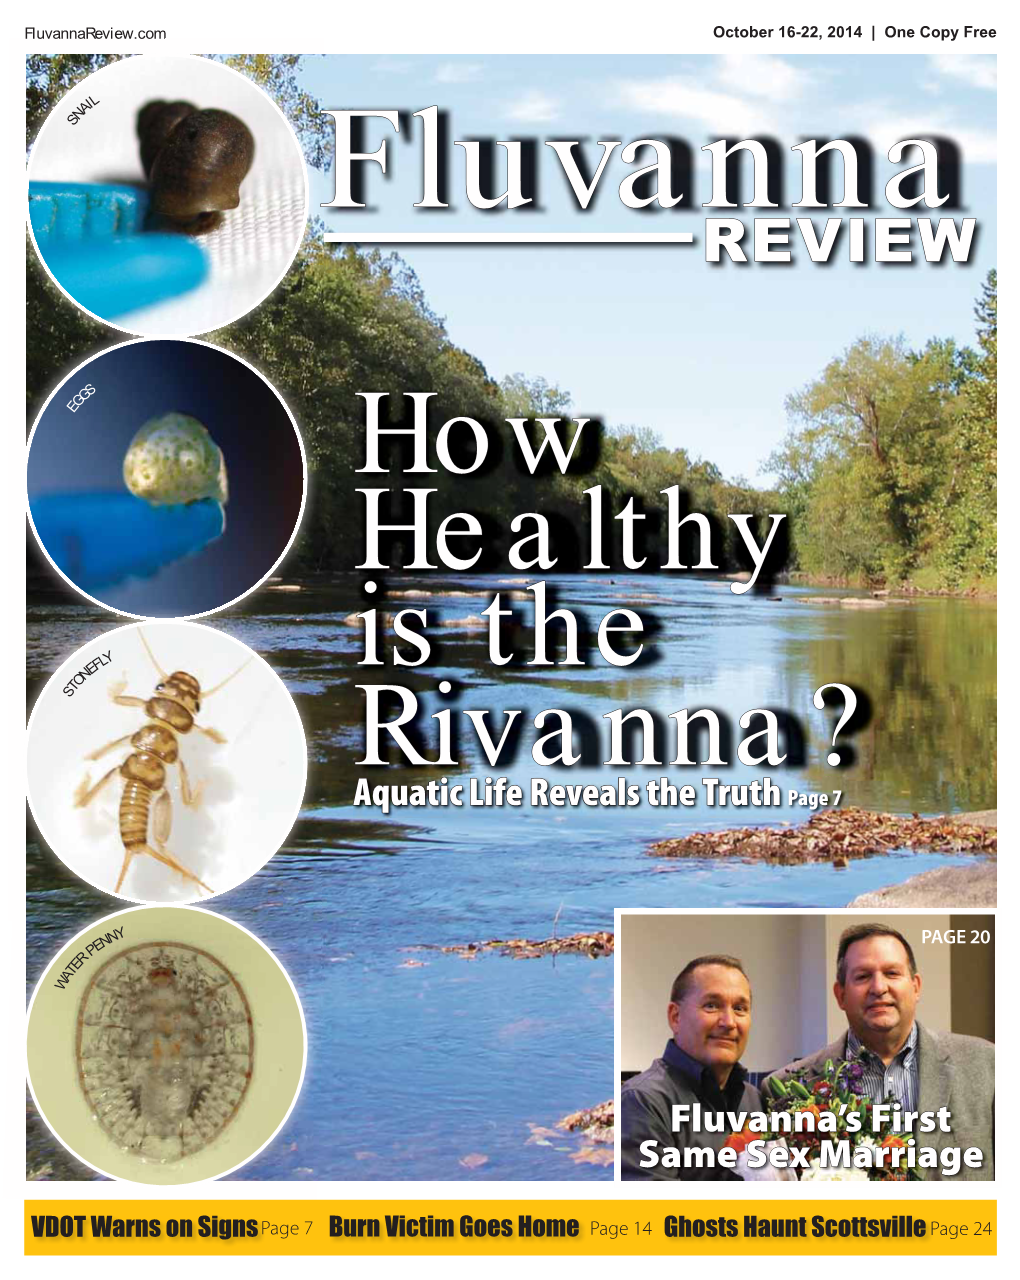 Fluvanna Review Is Published Weekly by Valley Legal Ads: the Fluvanna Review Is the Paper of Record for (434) 591-1000 Publishing Corp